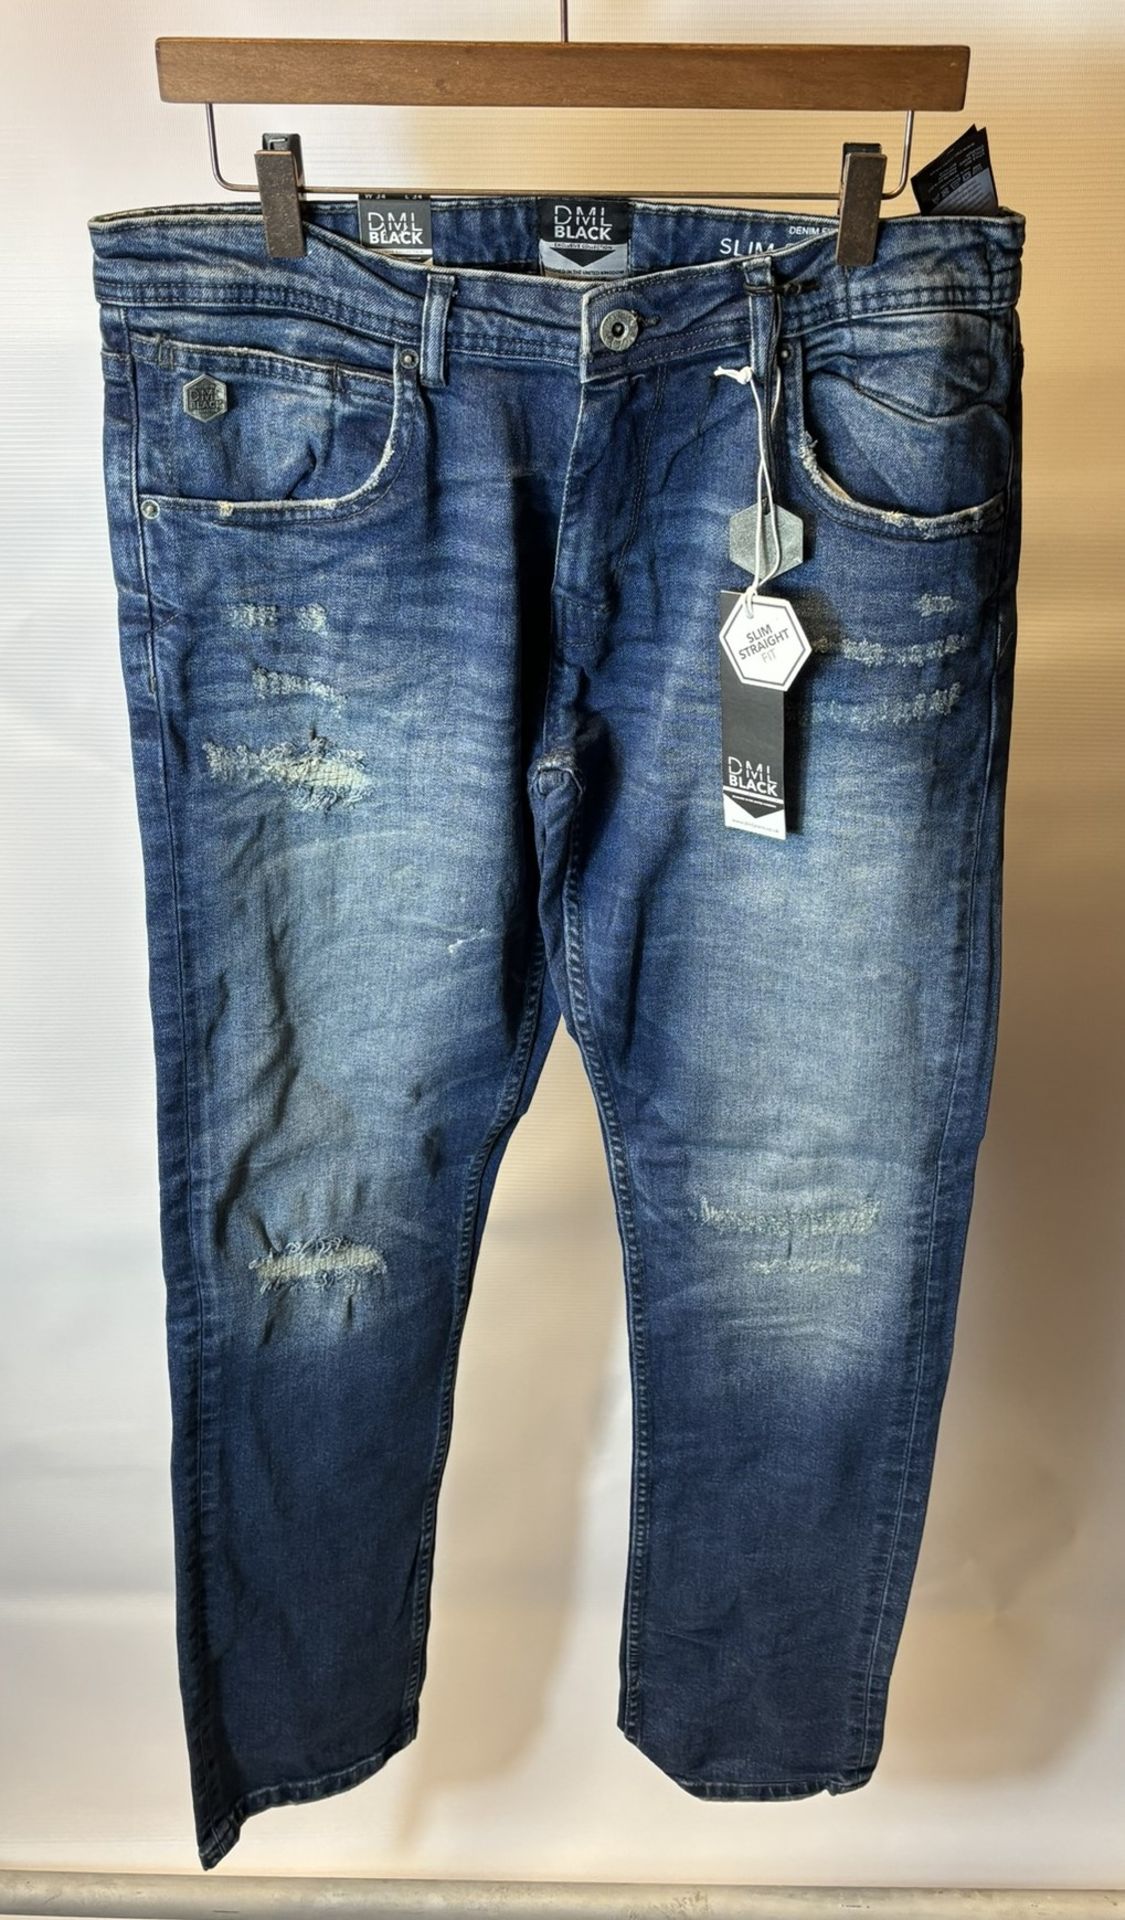 13 x Pairs Of various Sized DML Jeans Prophecy & Voyage Blue Jeans - Image 7 of 39